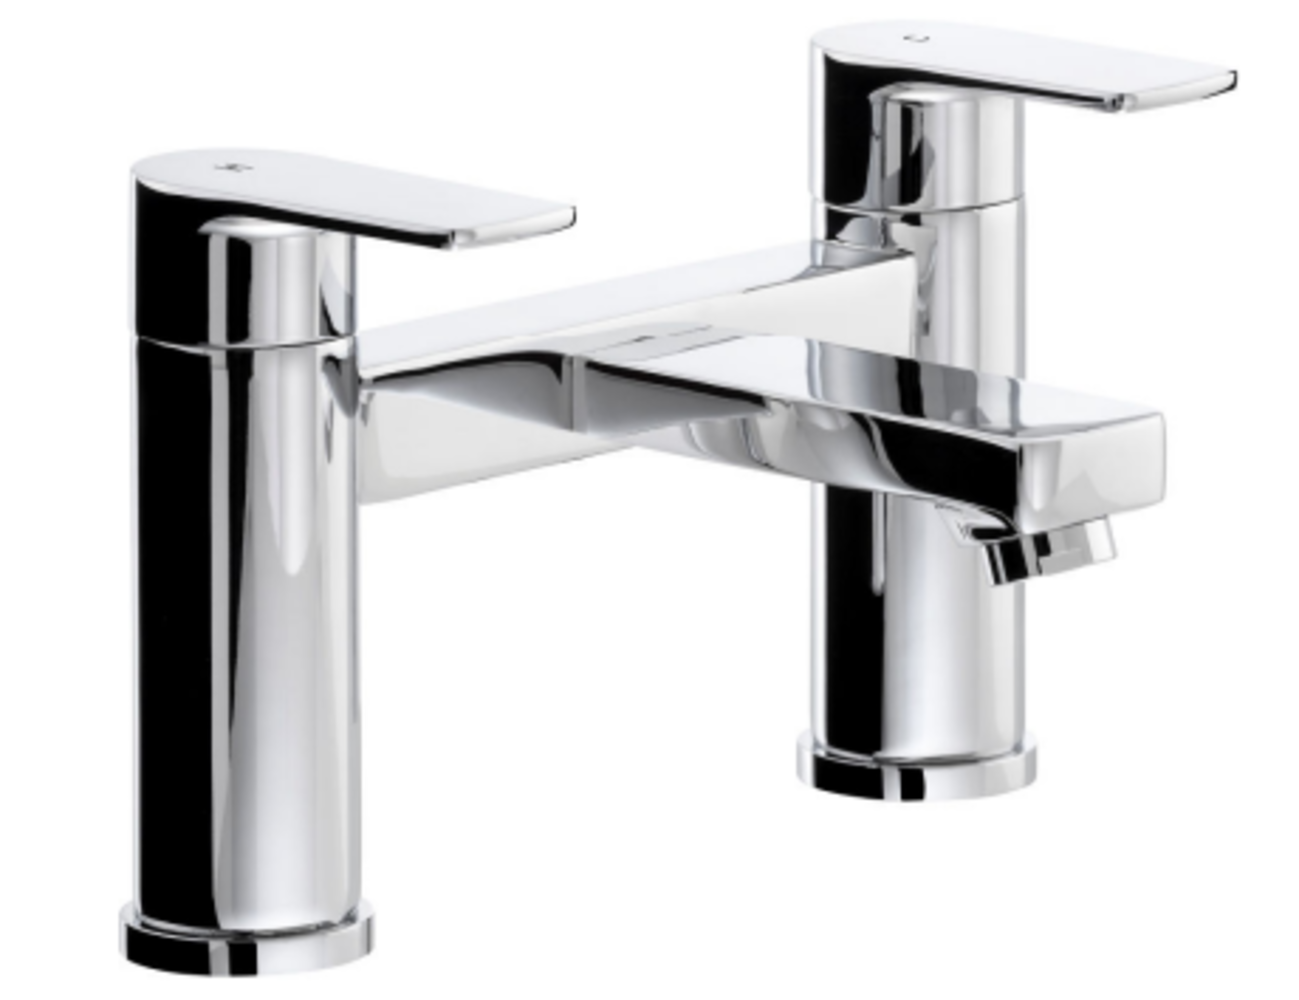 BULK LOTS OF BRAND NEW HIGH QUALITY CHROME TAPS FROM LAMONA BY ABODE - COLLECTION & DELIVERY AVAILABLE